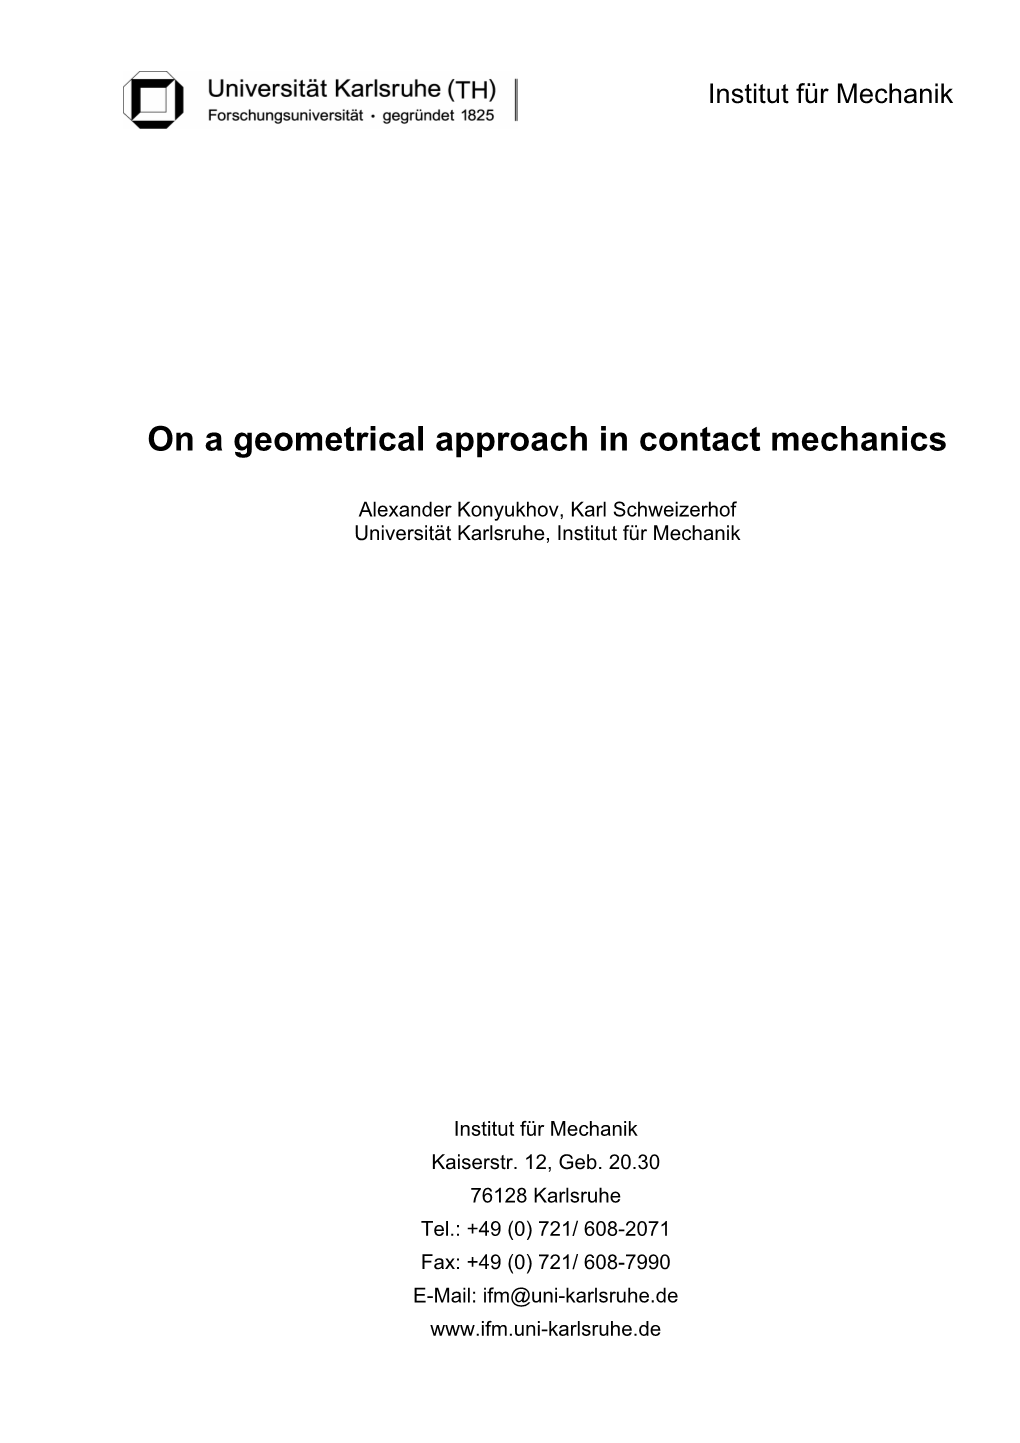 On a Geometrical Approach in Contact Mechanics